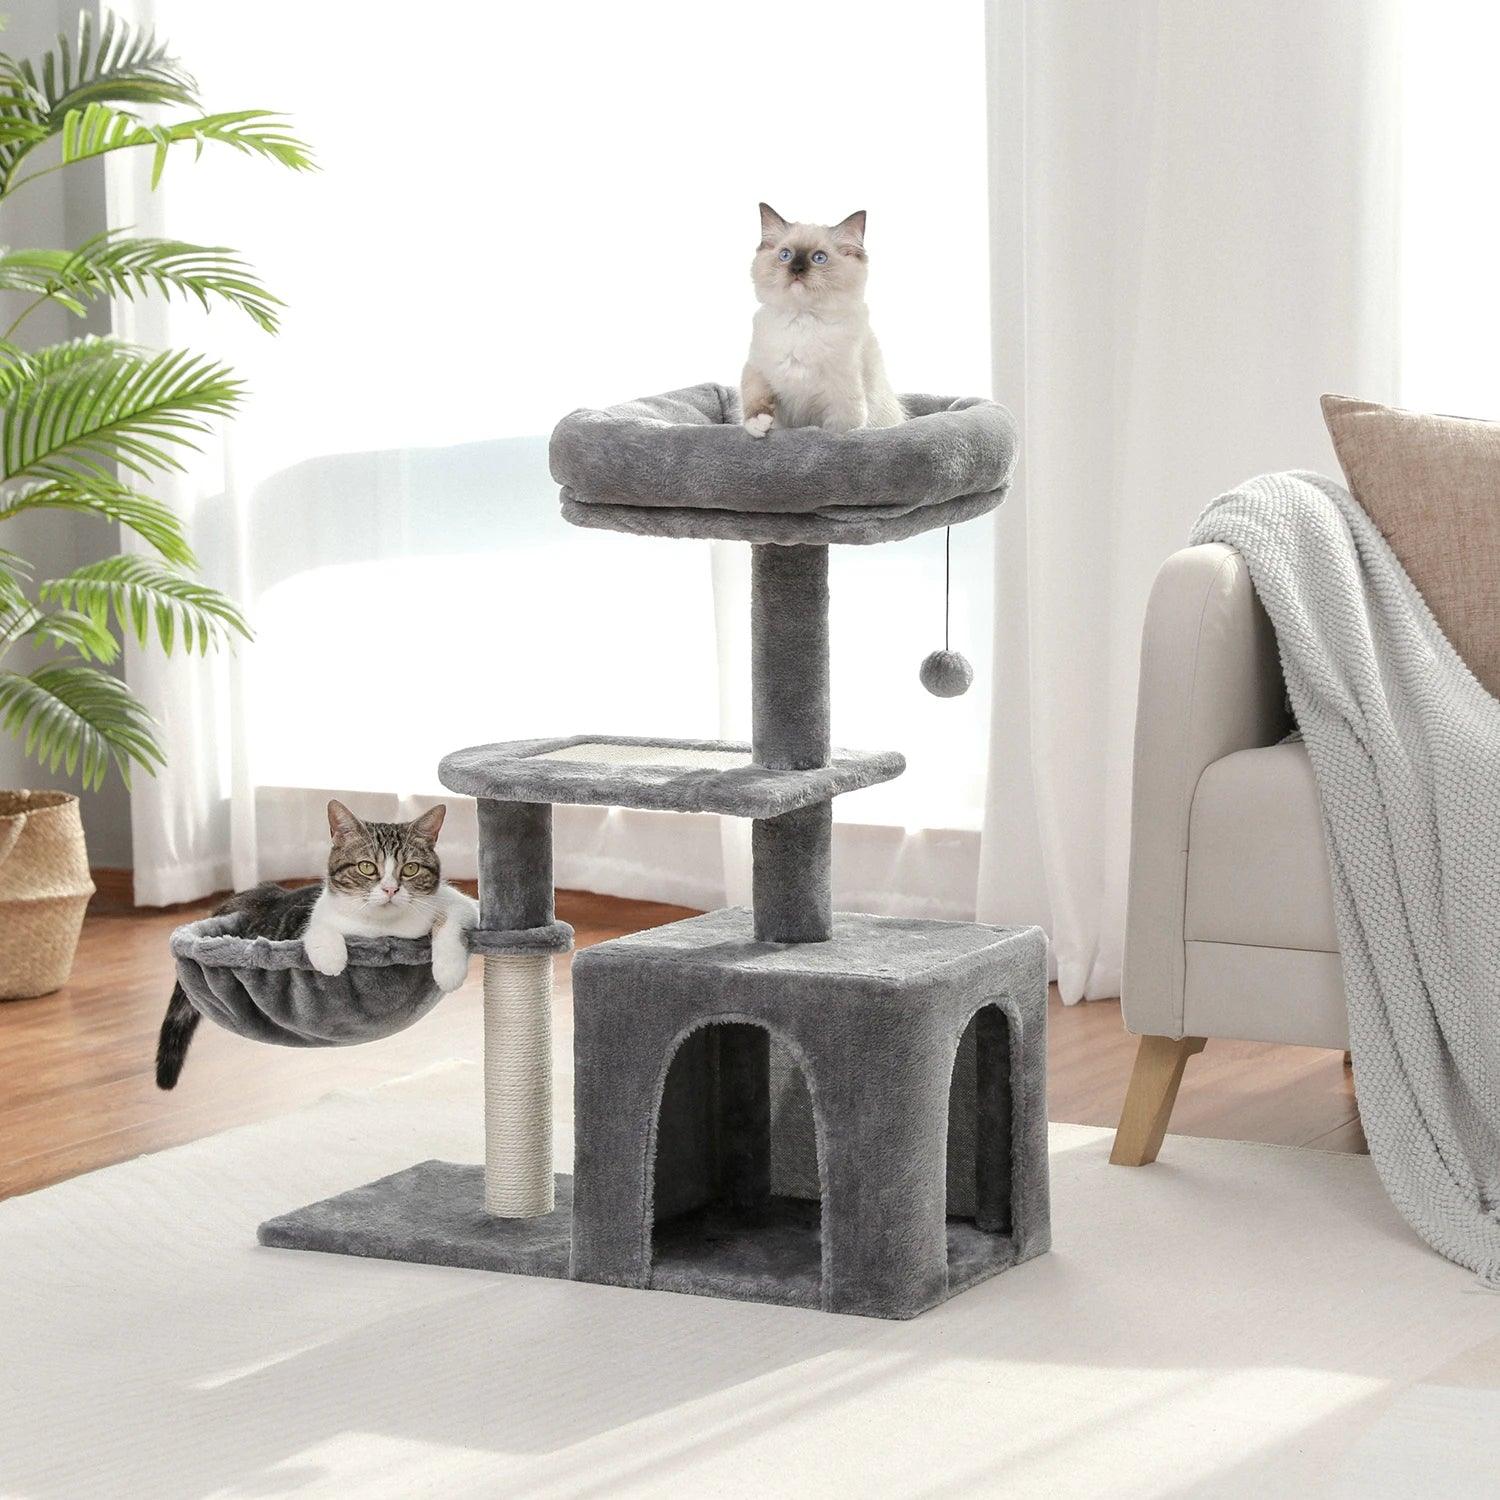 Natural Sisal-Covered Scratching Small Cat Tree - Meowfunpets